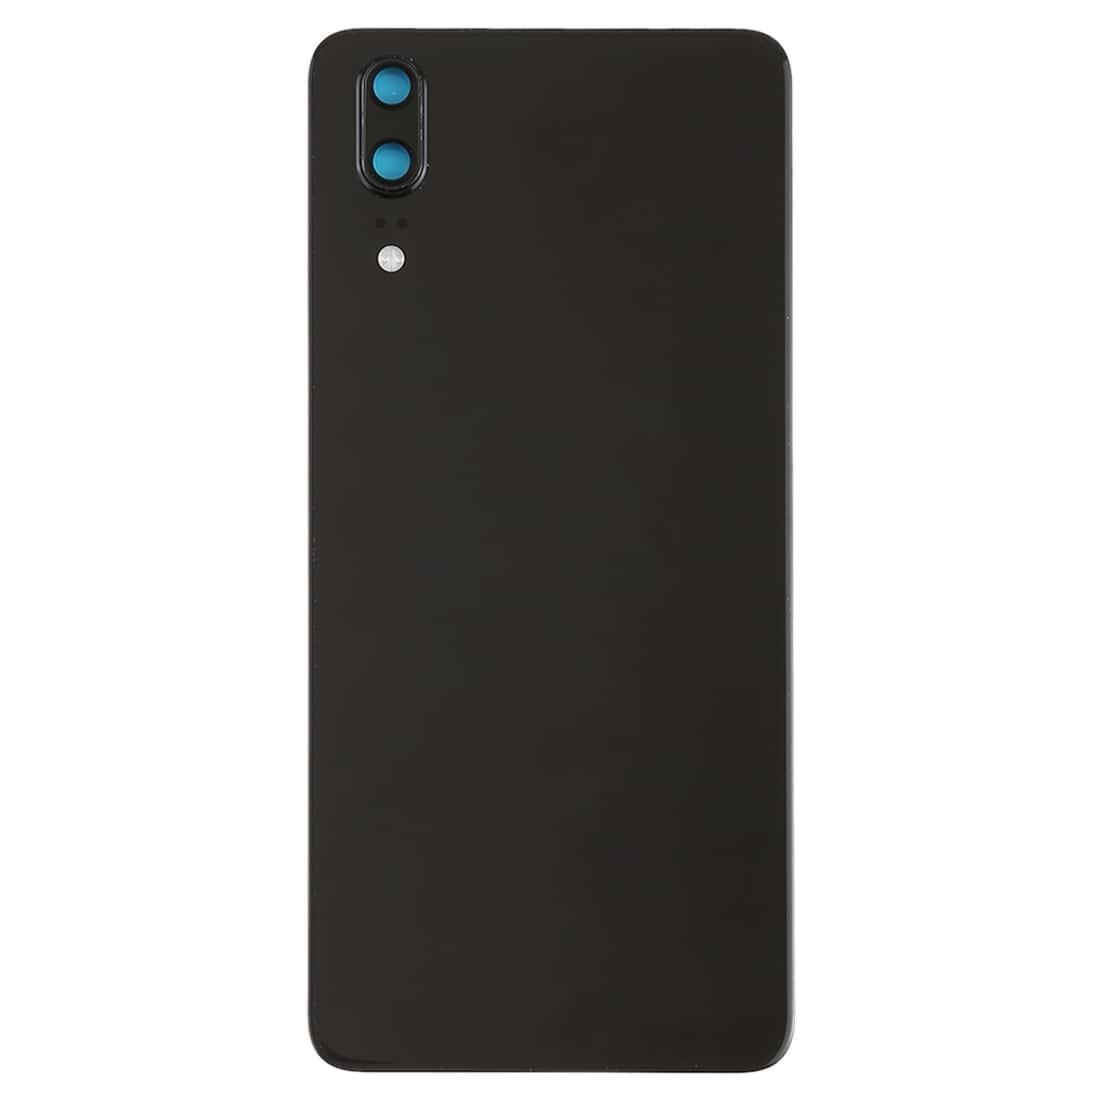 Back Panel Housing Body for Huawei P20 Black with Camera Lens